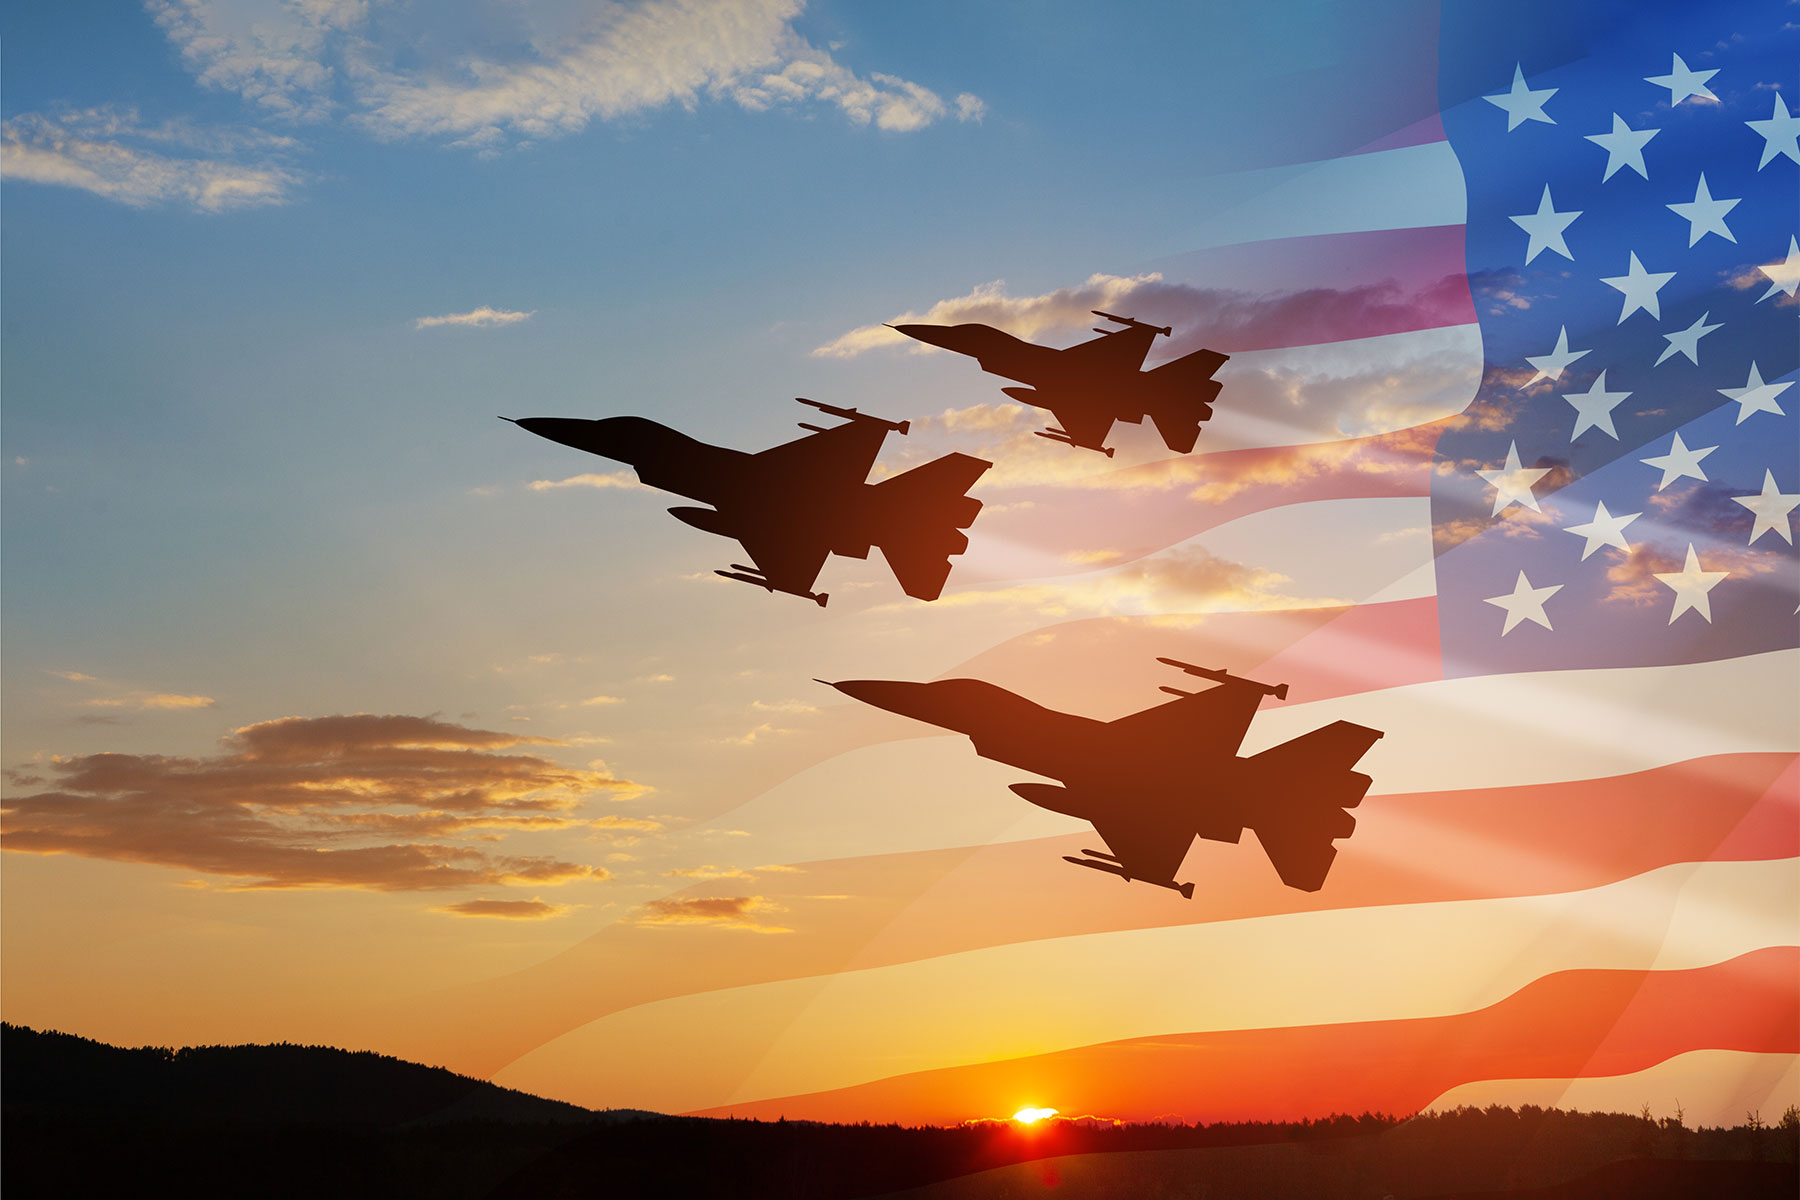 jets flying in front of a sunset, transparent american flag overlay